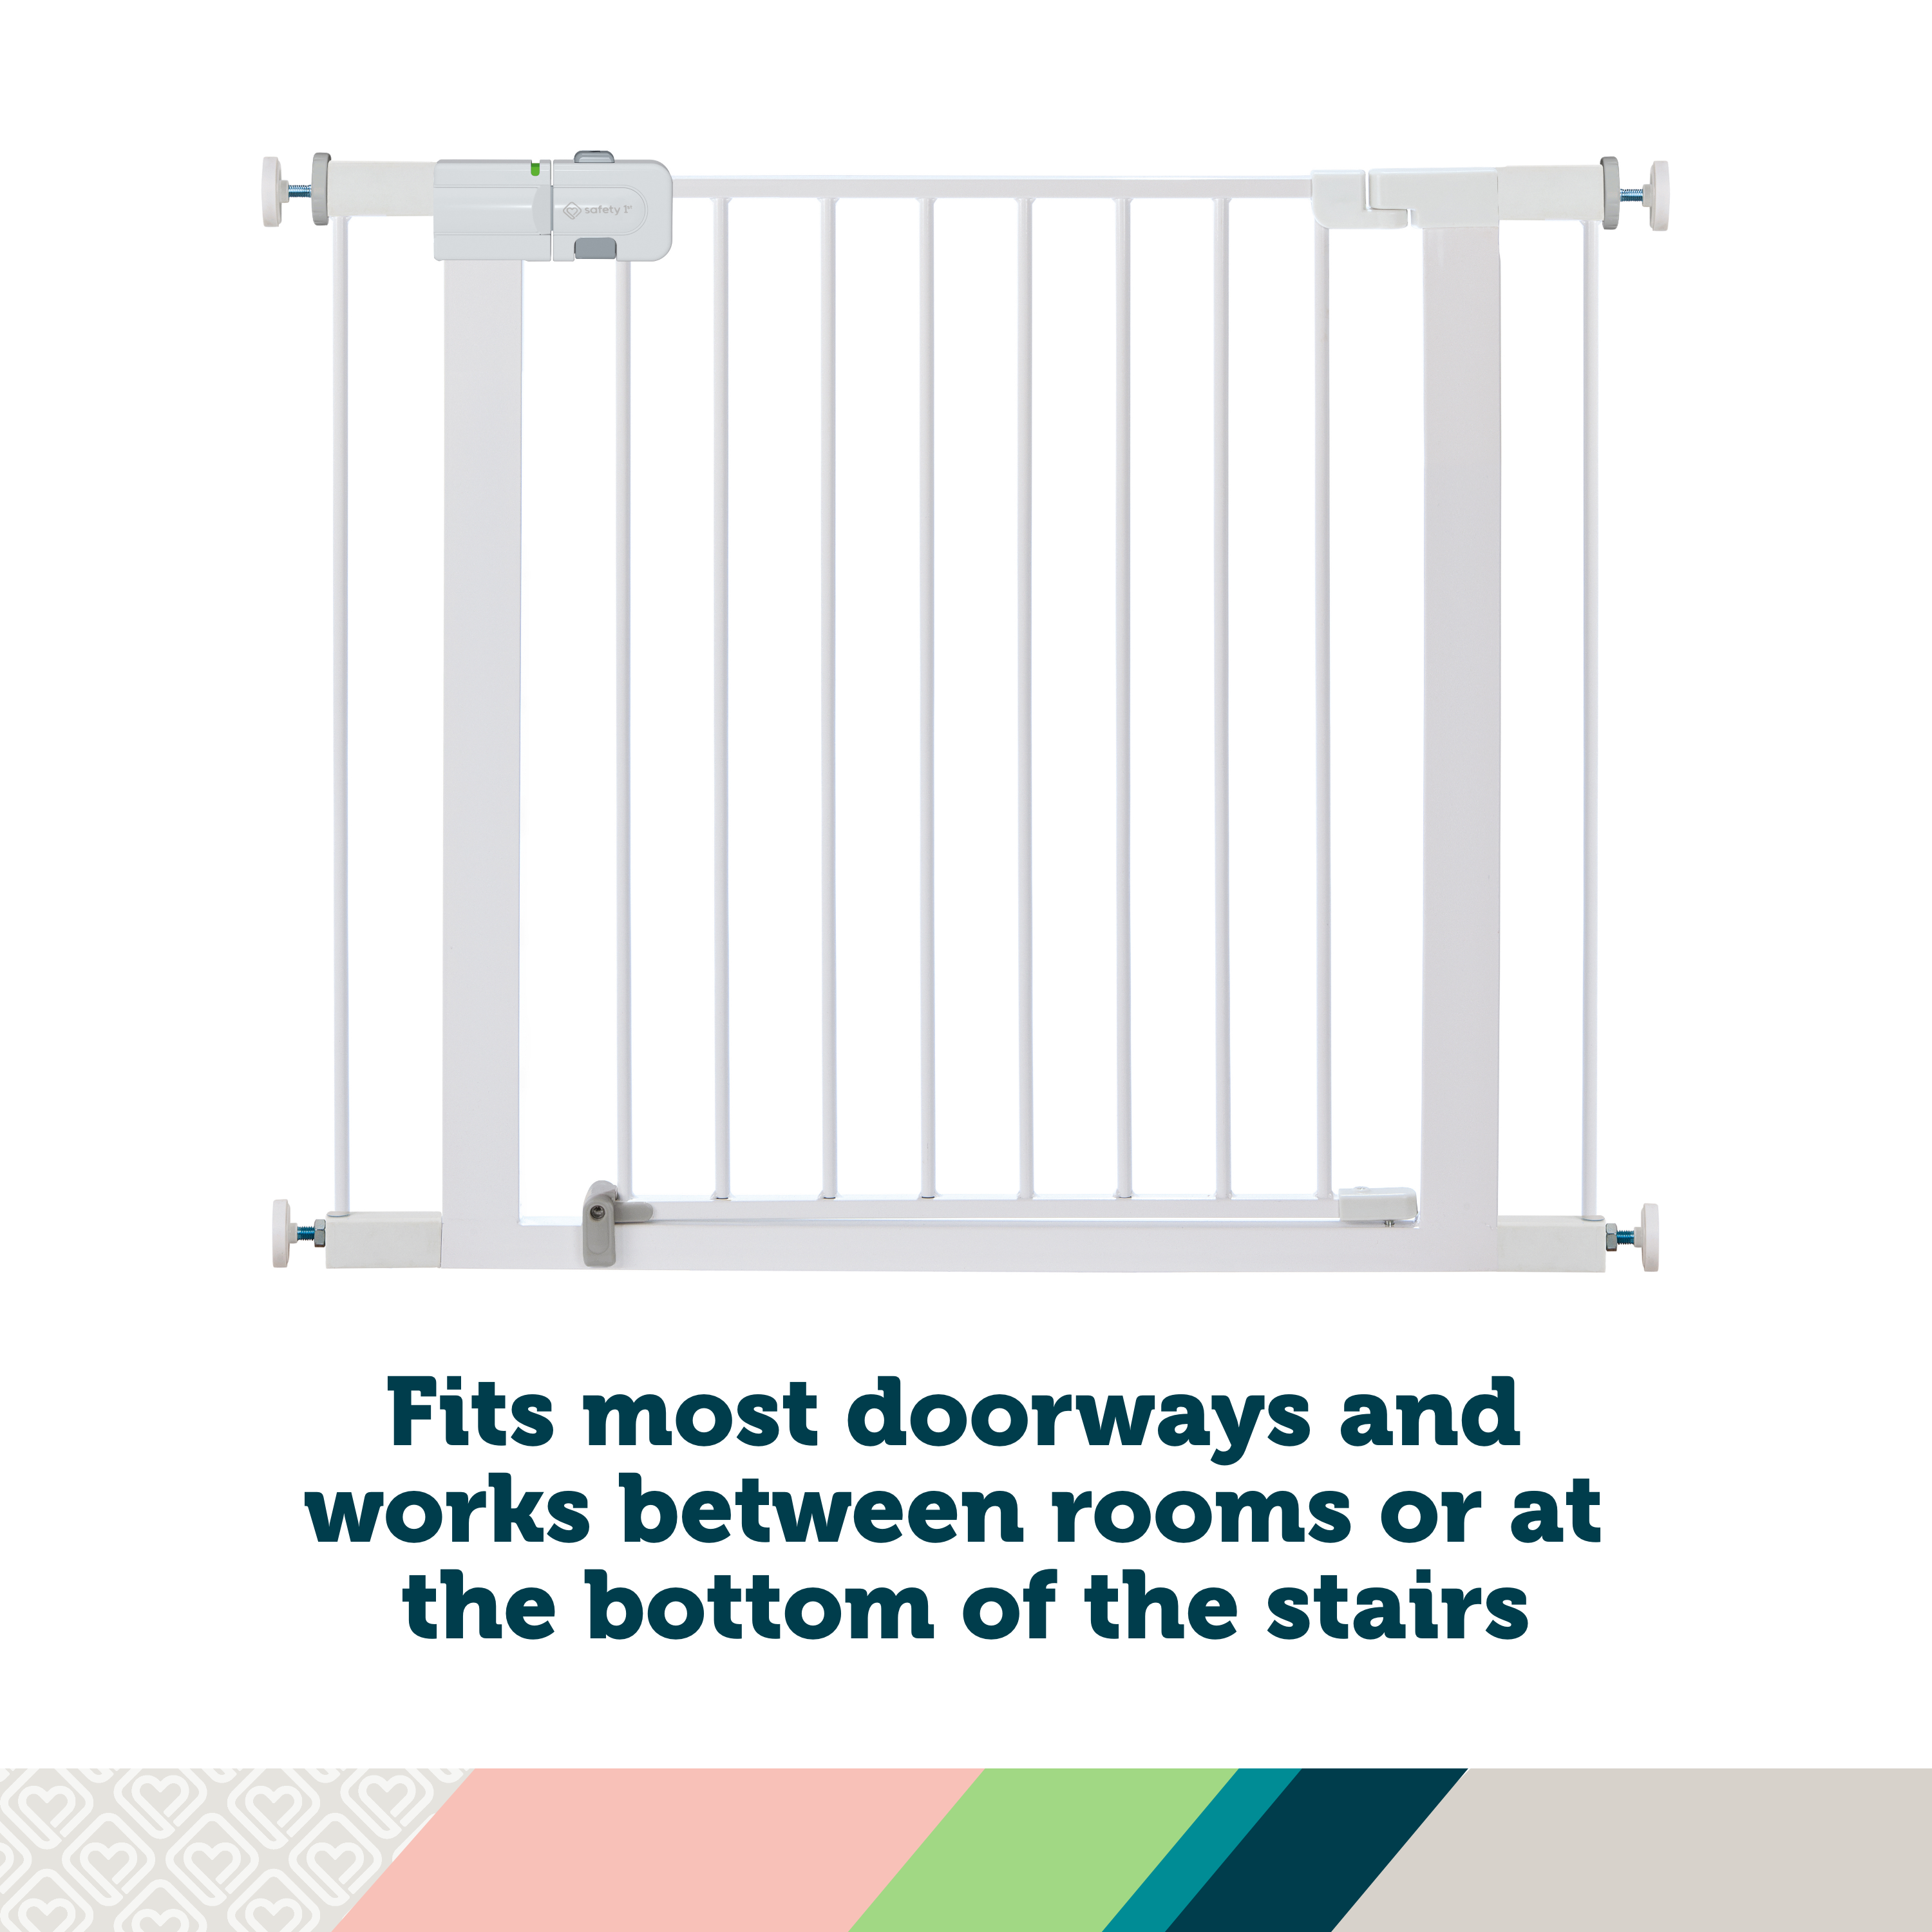 Easy Install Walk-Through Gate - fits most doorways and works between rooms or at the bottom of the stairs